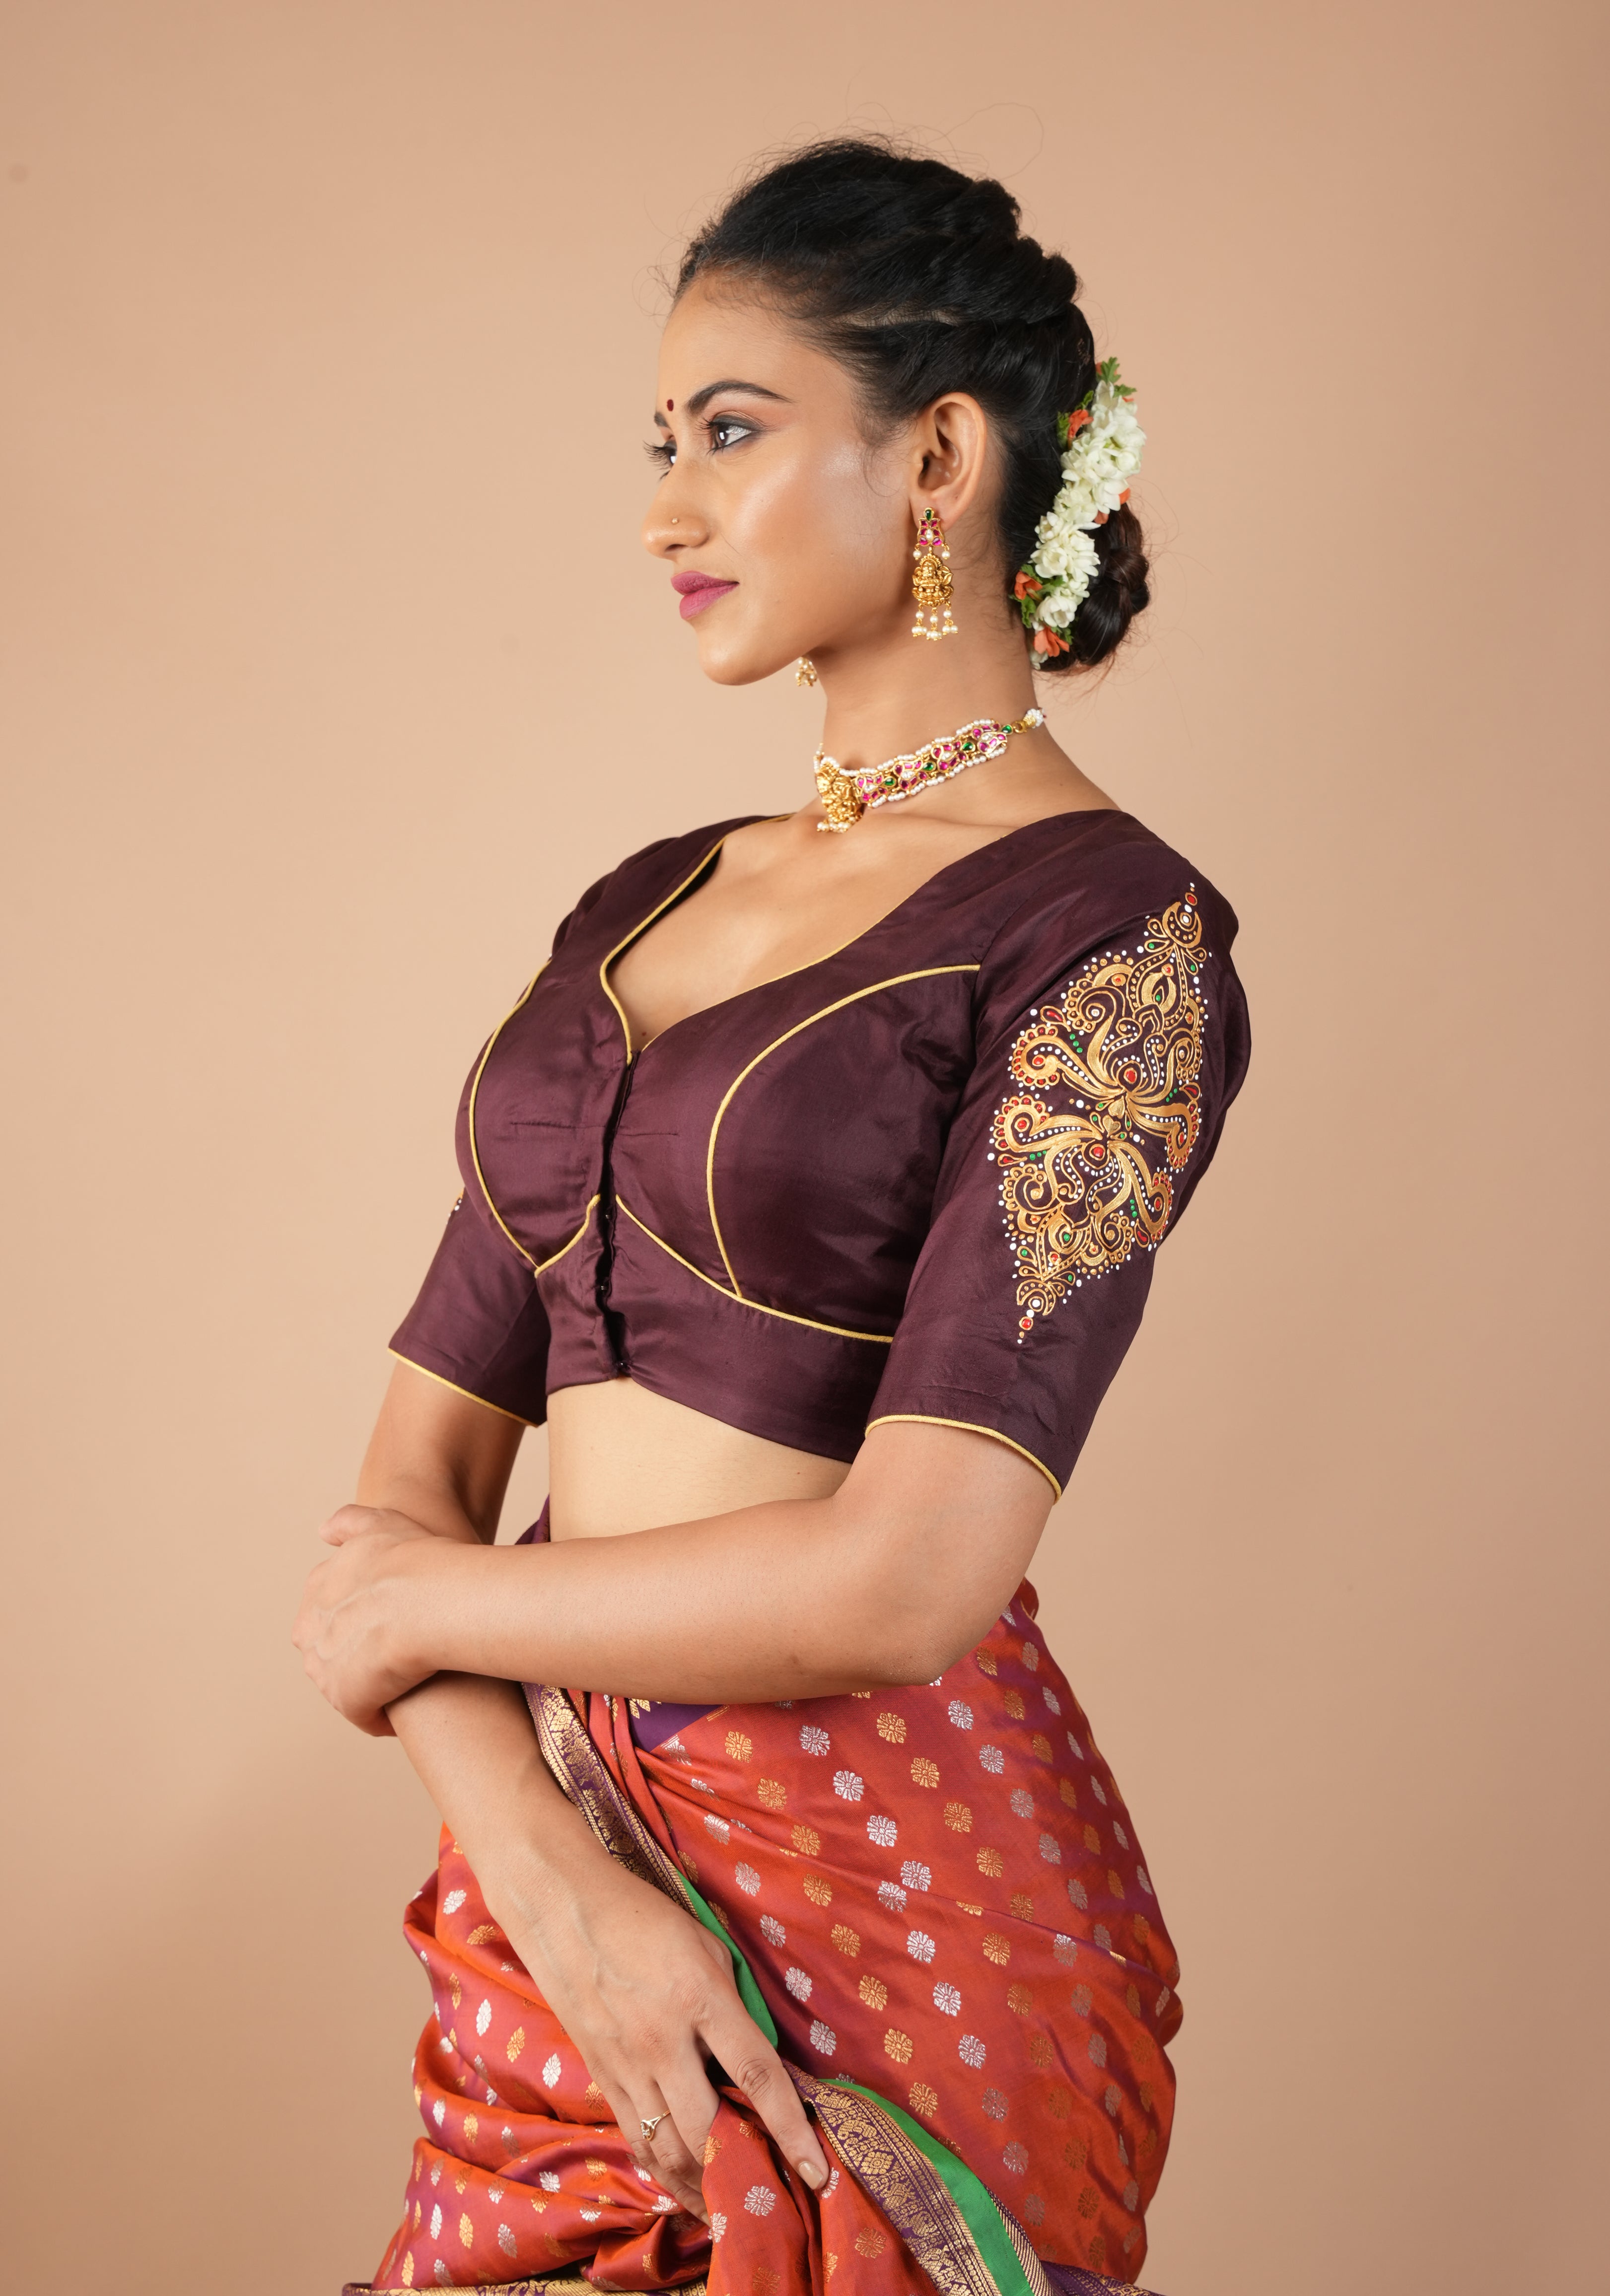 Brown Pure Silk Blouse with 3D Tanjore Art Damansk Motif on Sleeves and Arch Cutout back, Color Customization available, made to order